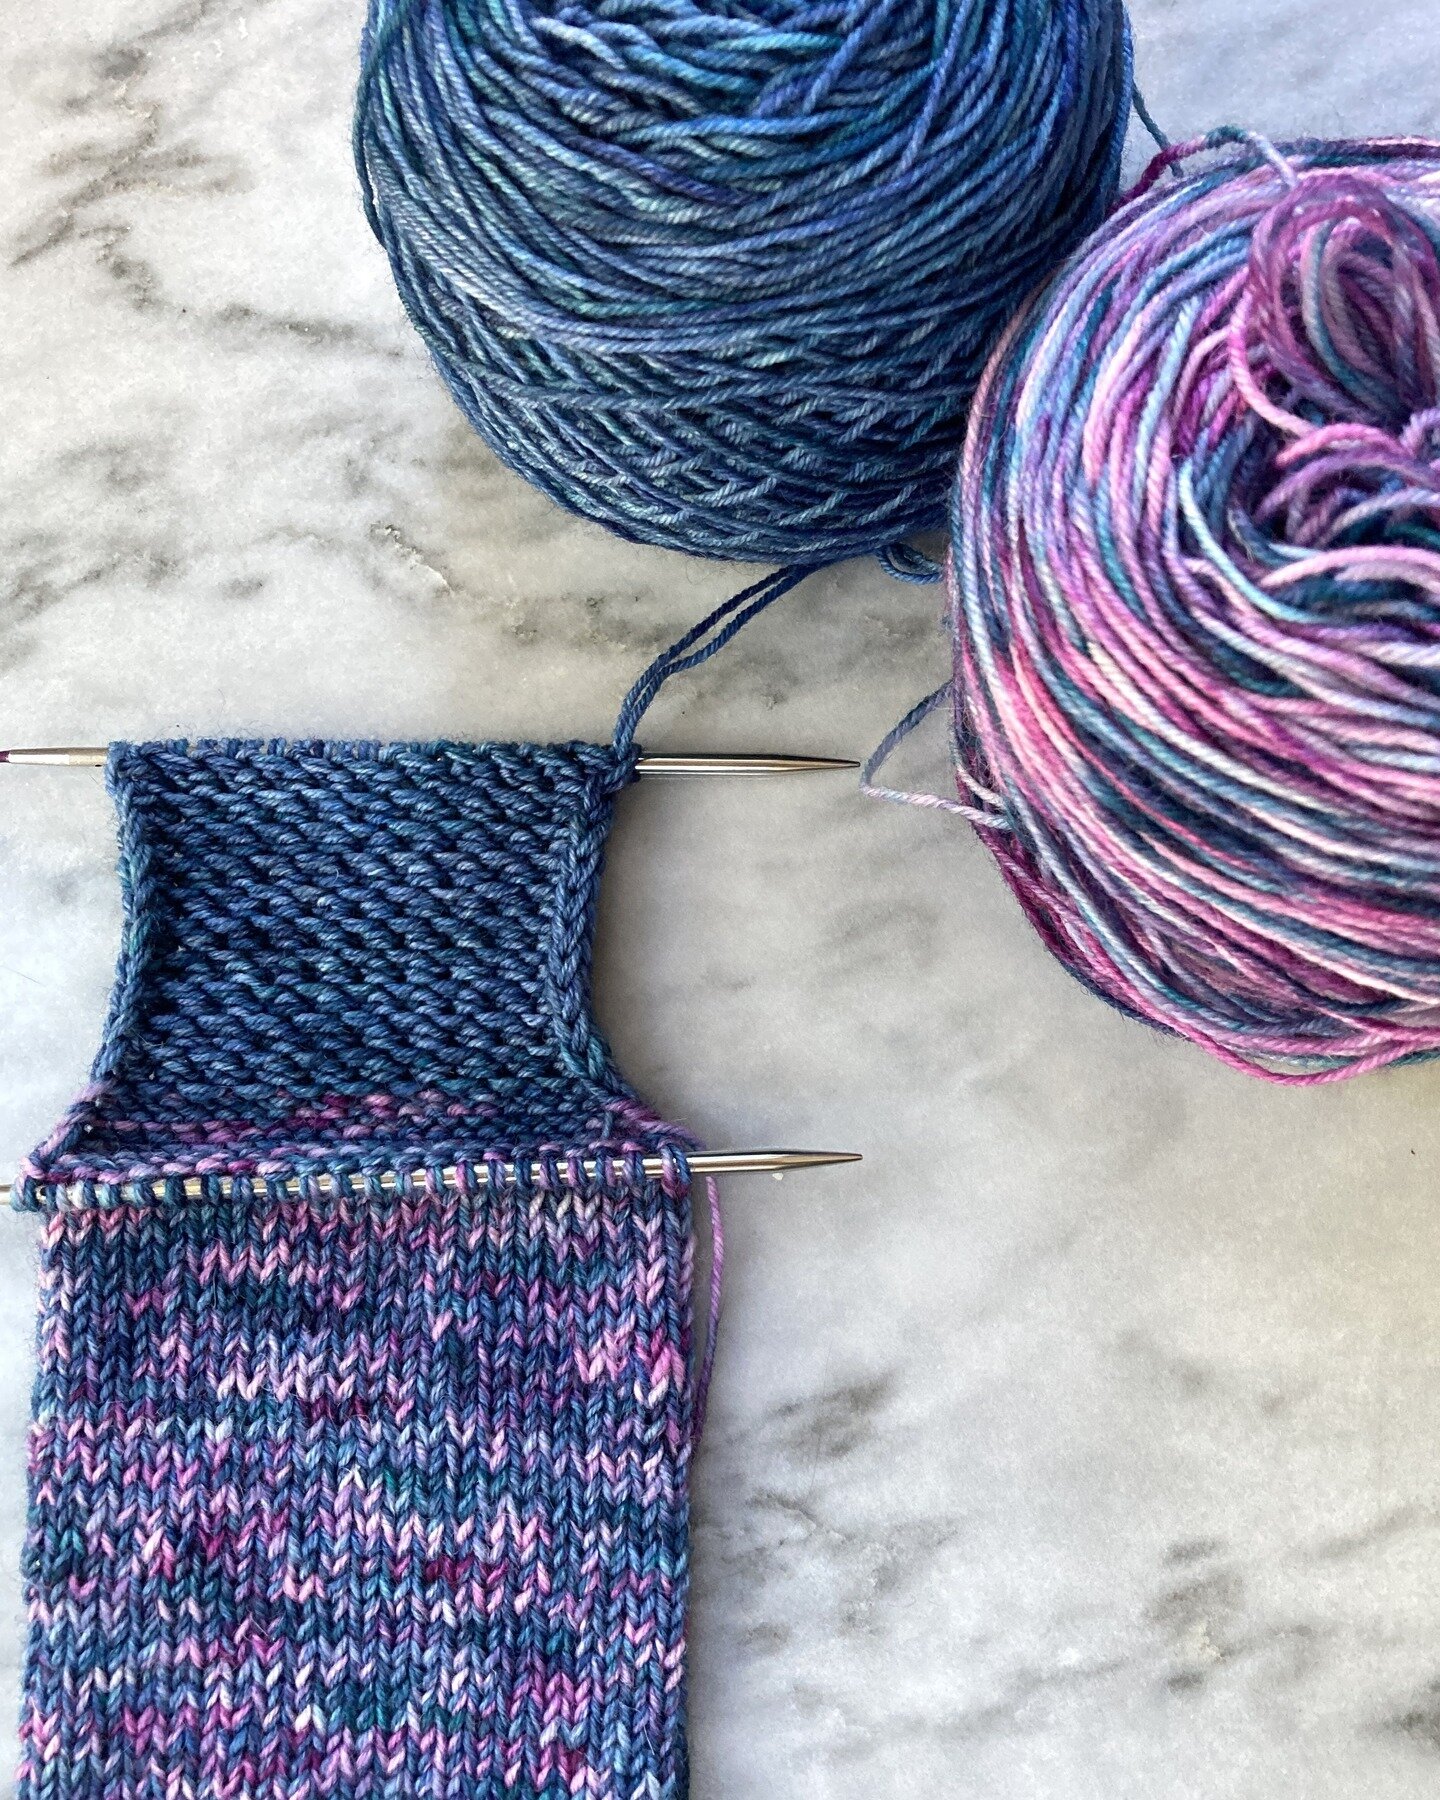 I think this might be an unpopular opinion, but knitting the heel flap and turn is my favorite part of sock knitting! 🧦💖

I love that it is a little break from knitting stockinette in the round and the slip stitch heel is fun to knit. And seeing th